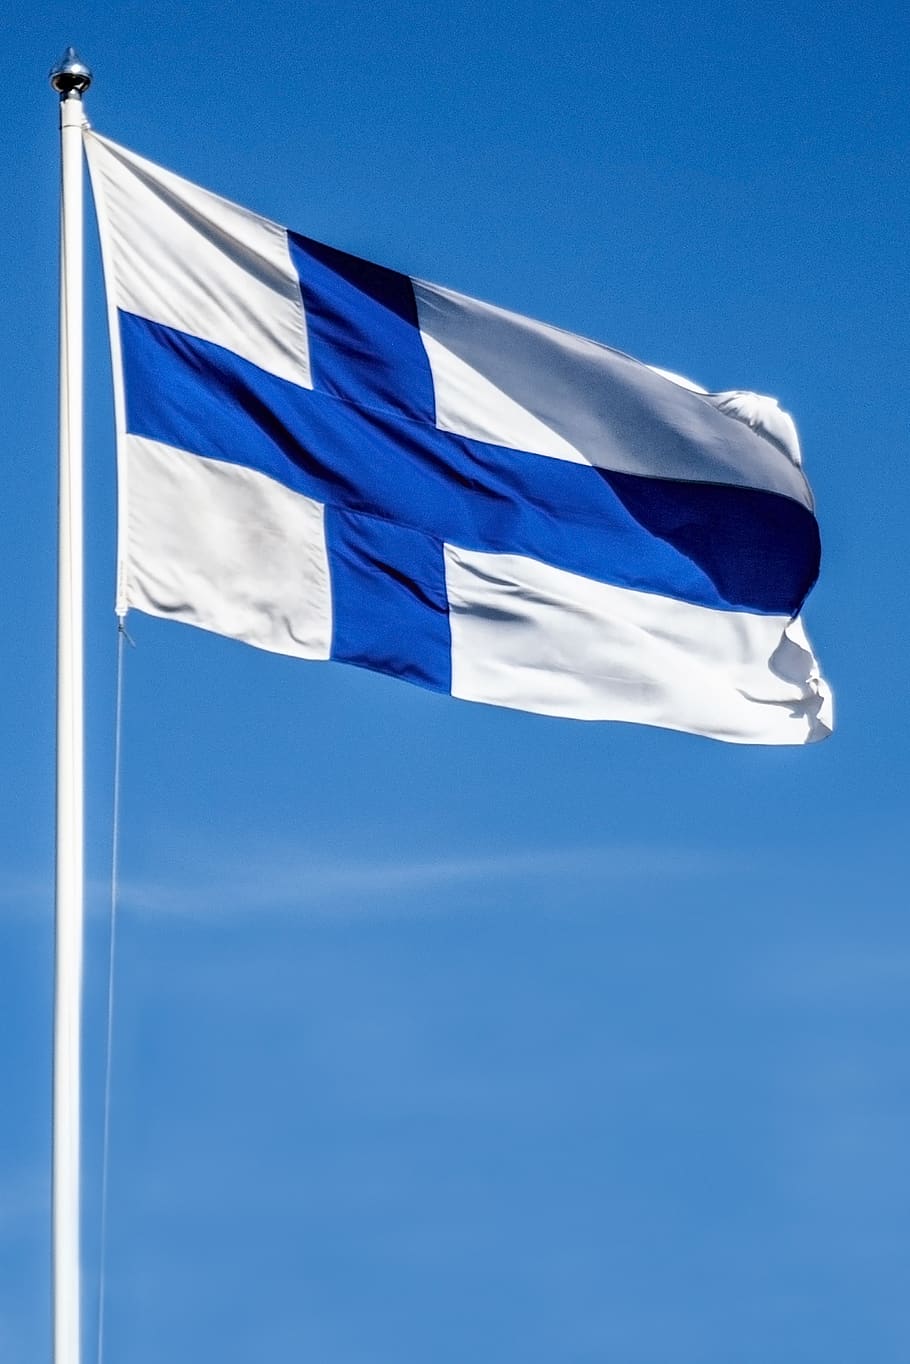 flag of finland, blue cross flag, tickets, blue and white, independence day, HD wallpaper